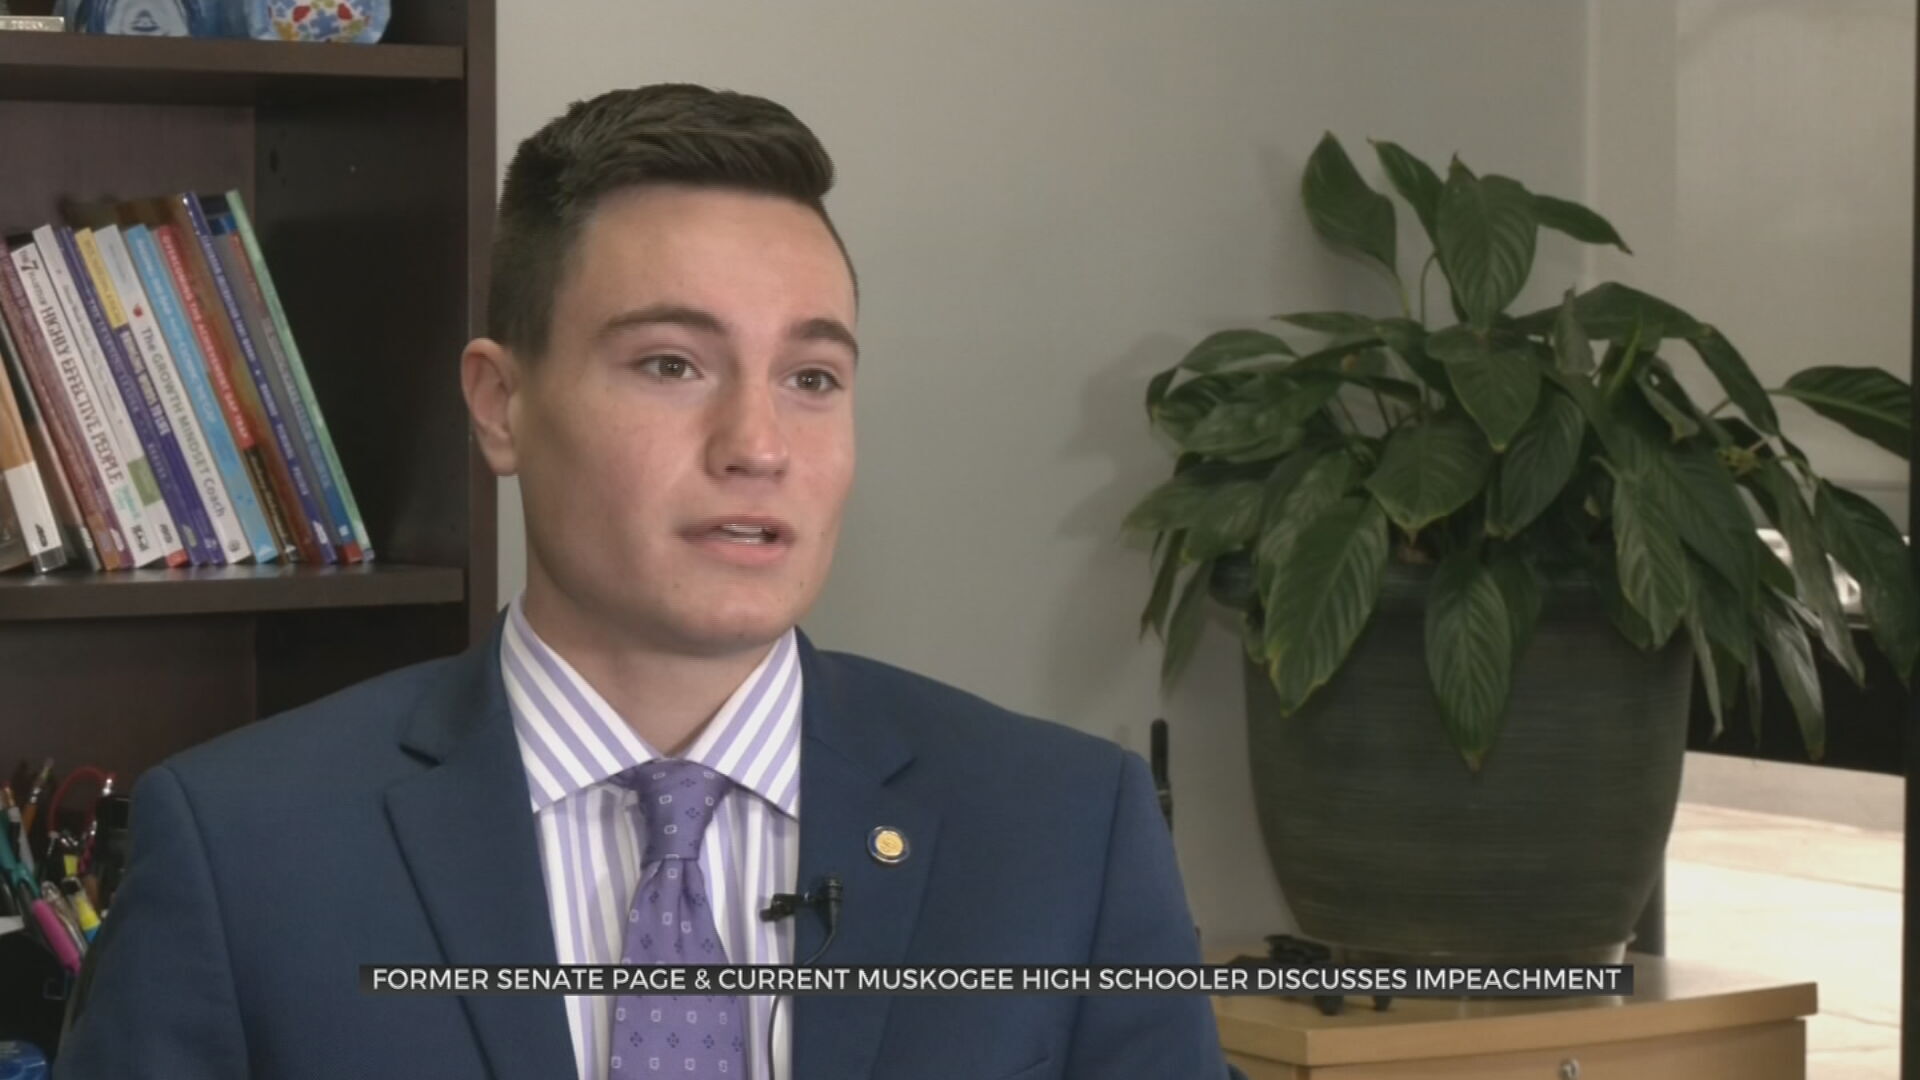 Muskogee High School Student, Former Senate Page Discusses Impeachment Experience